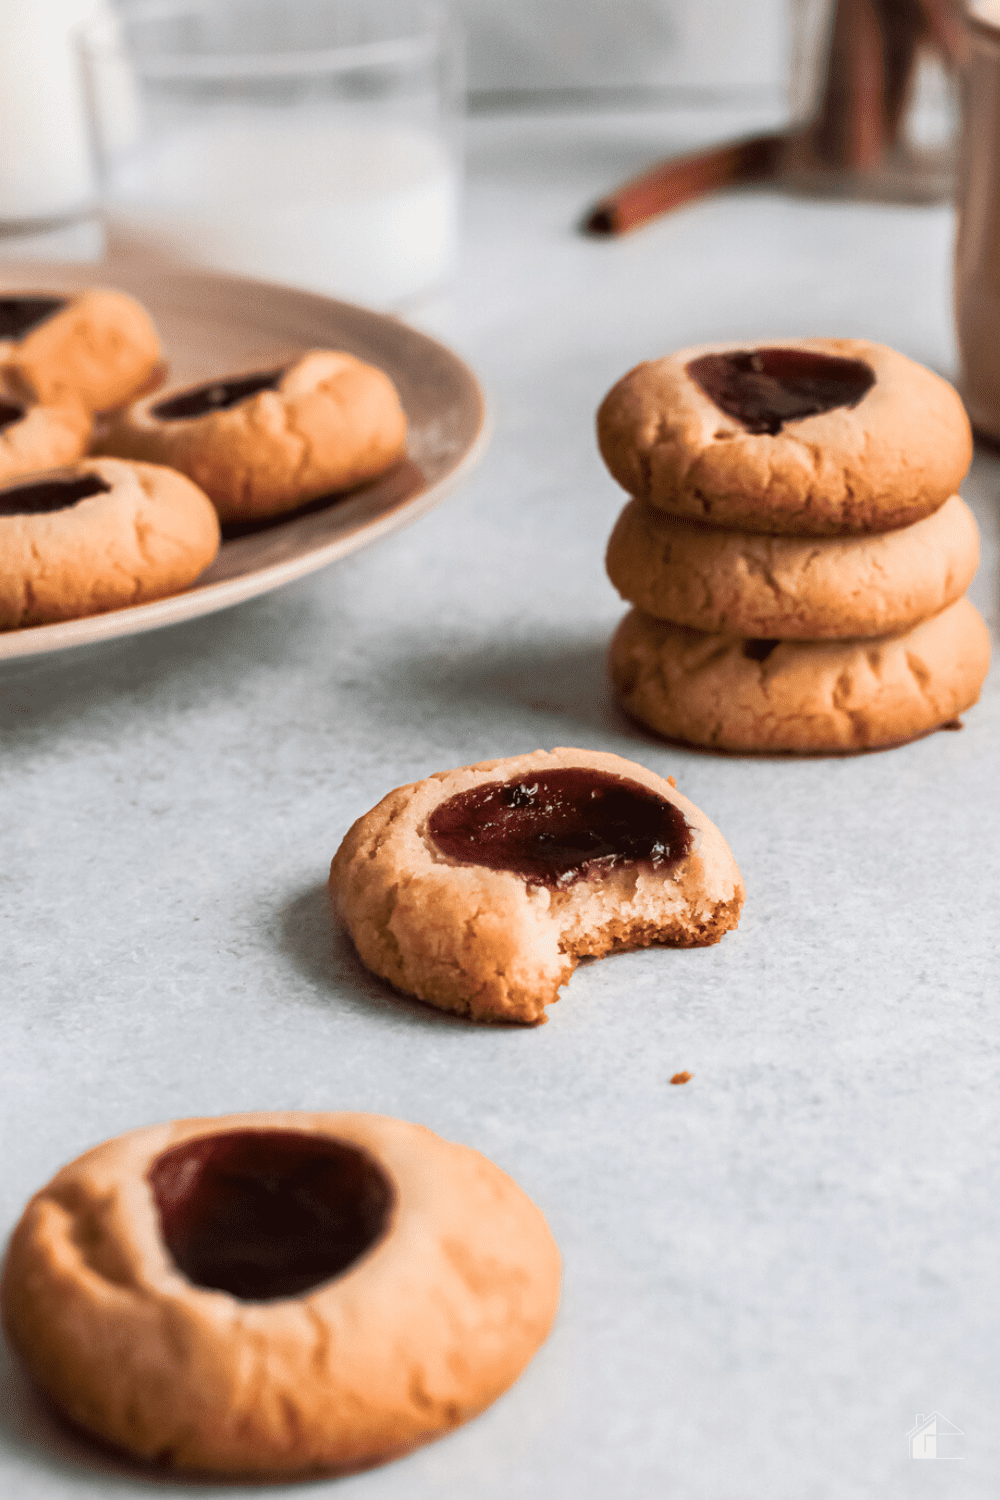 Learn how to make Puerto Rican Mantecaditos (shortbread) cookies with this easy-to-follow step-by-step recipe. via @mystayathome